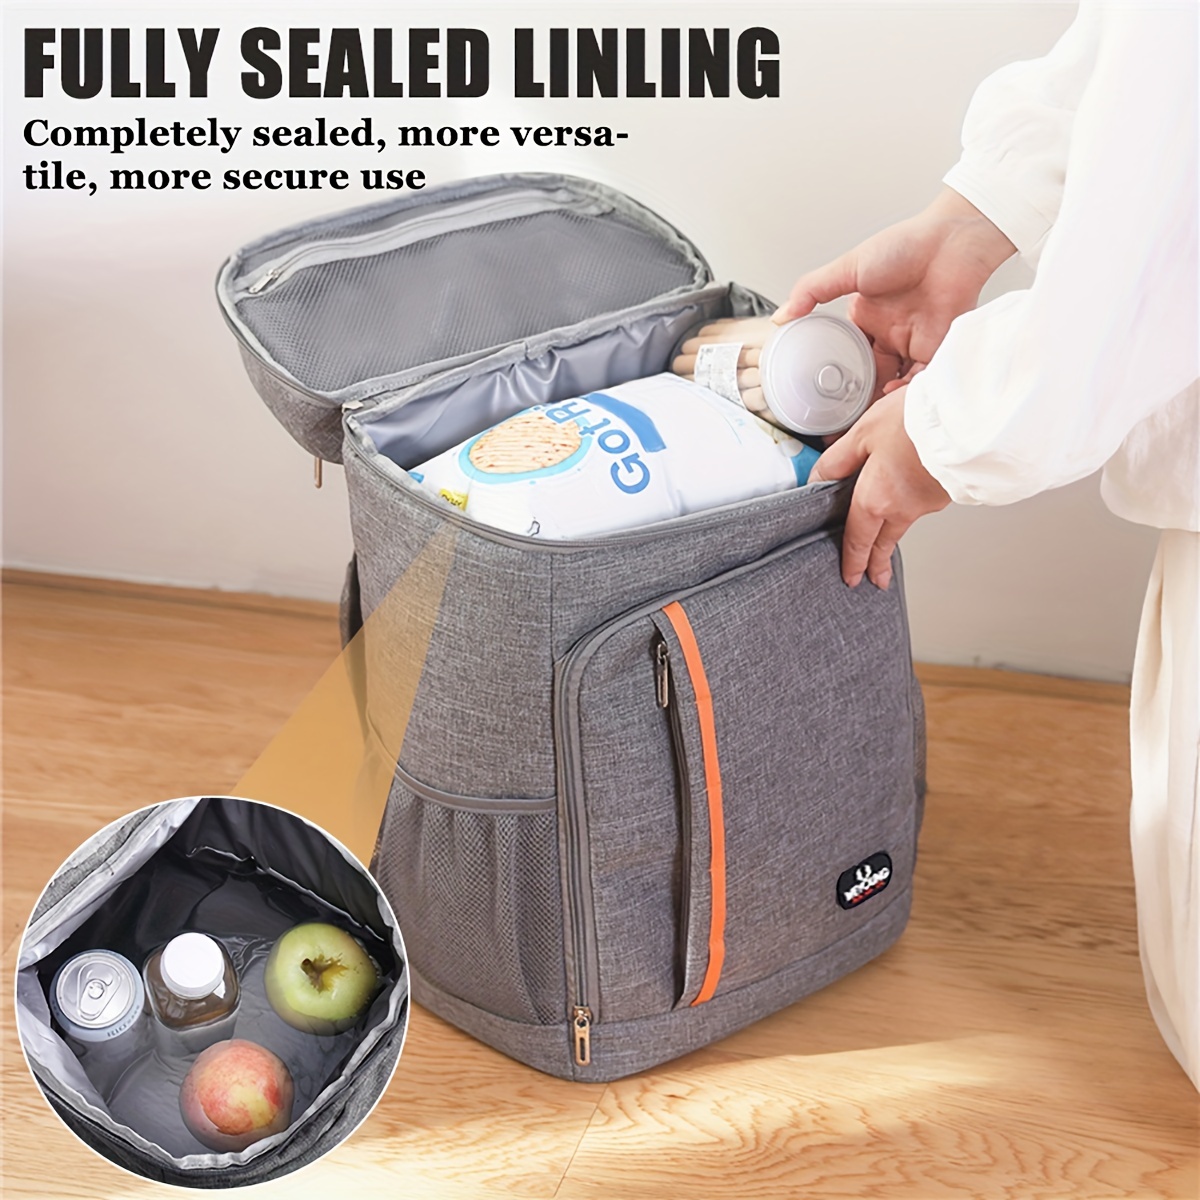 Multipurpose Lunch Bag with Adjustable Strap a Perfect Office Bag- Graffiti